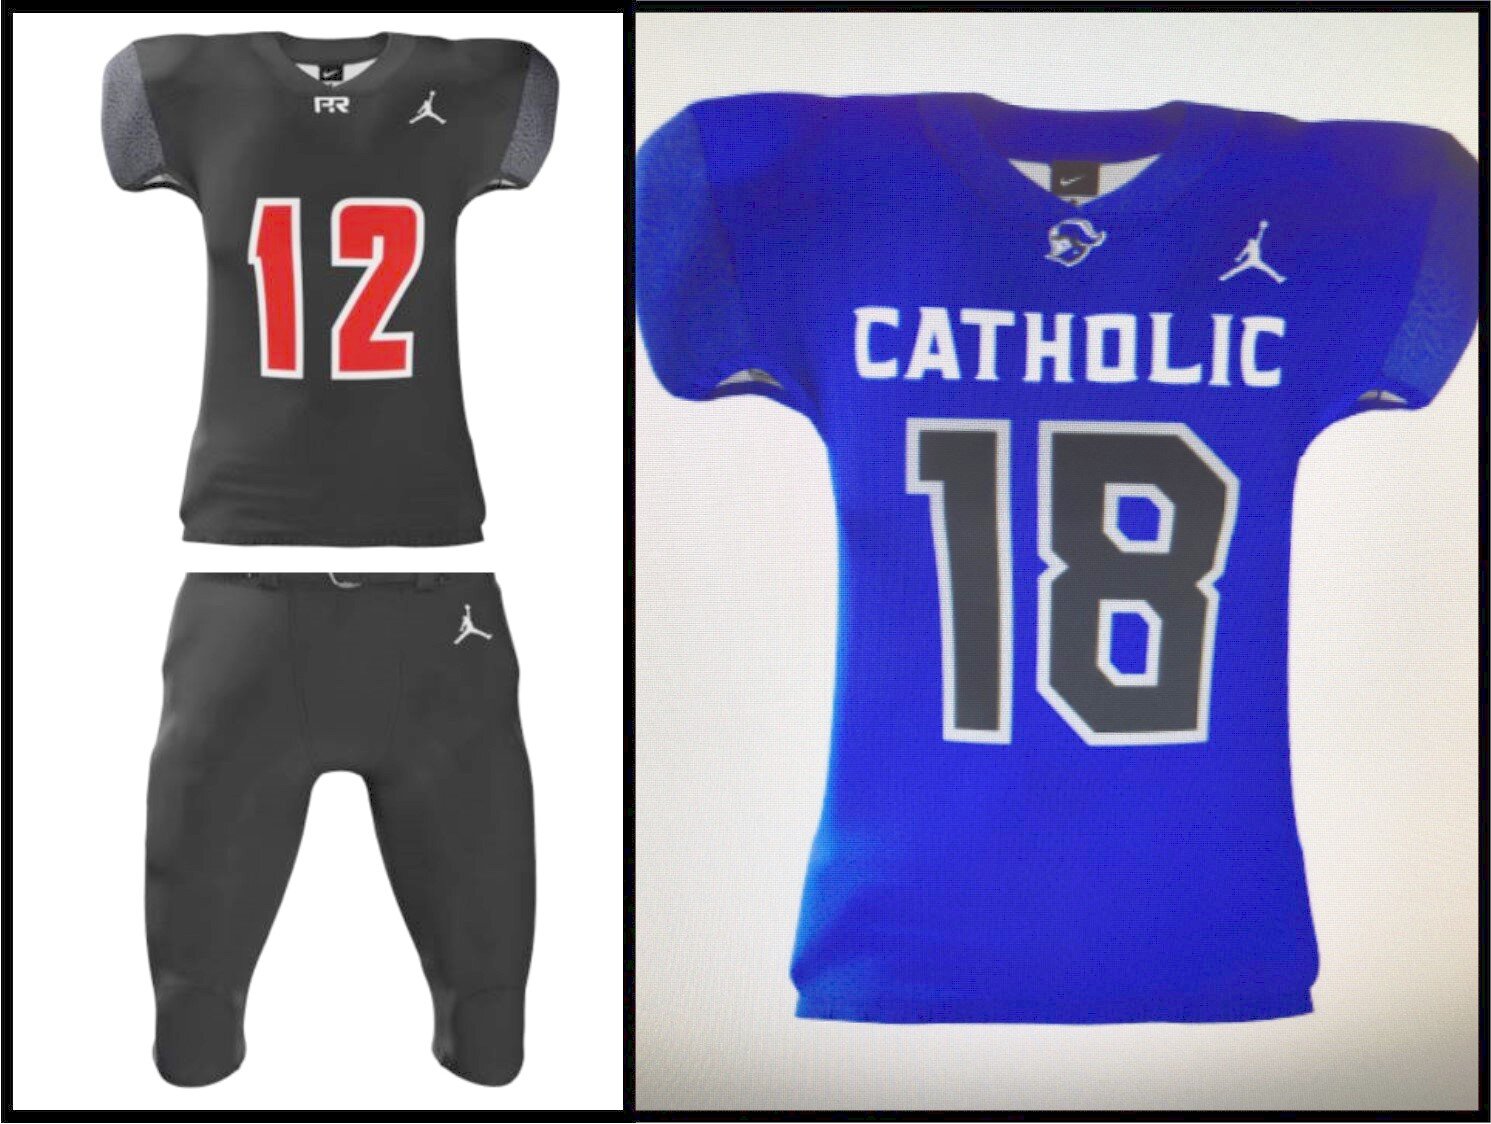 Local high schools get new threads for upcoming football season